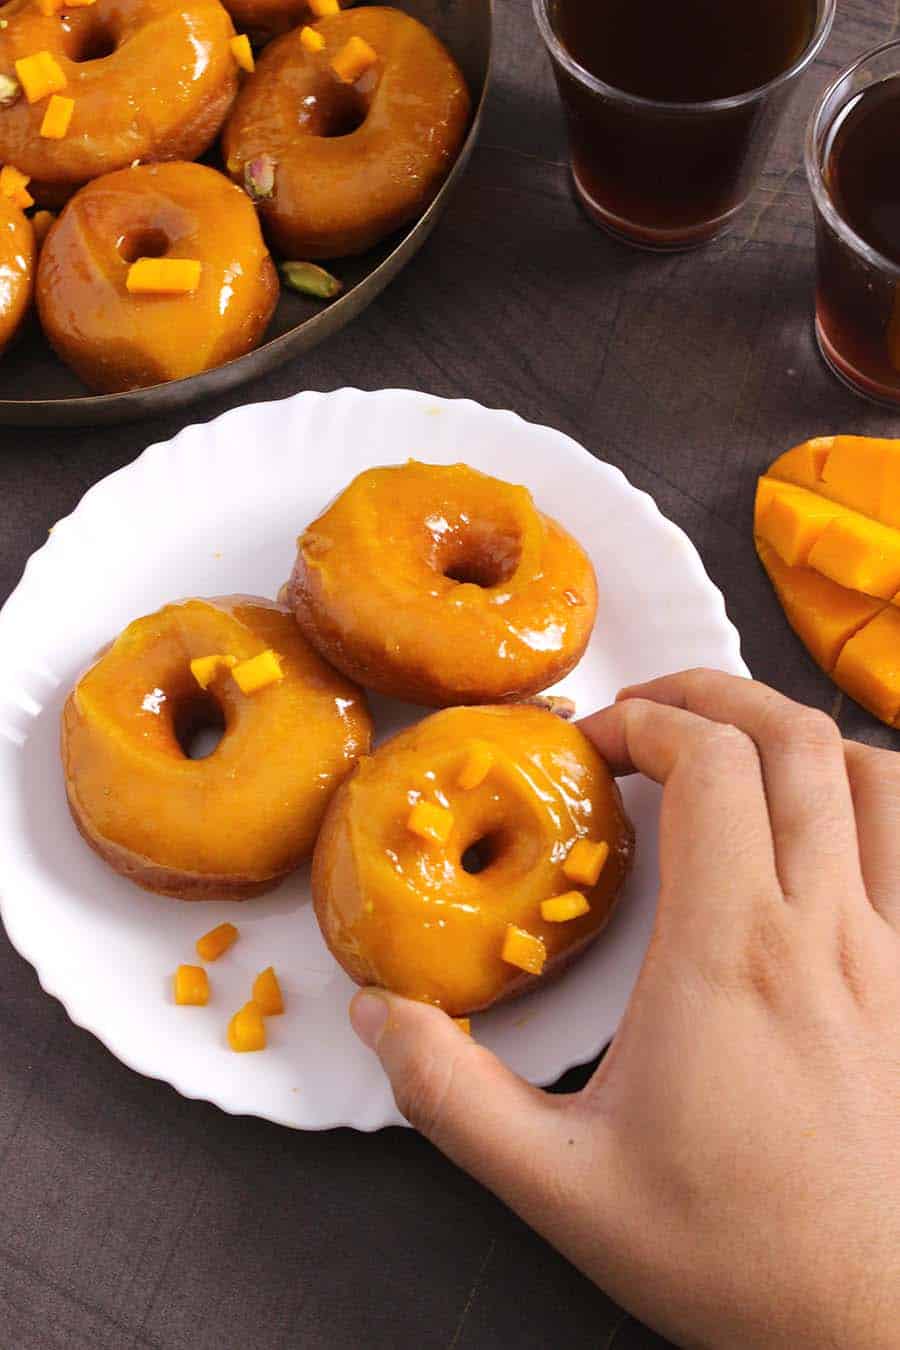 Vegan yeast glazed doughnuts or donuts, easy mango recipes (fresh, frozen, canned) summer food recipes - breakfast and dessert, fancy food recipes, homemade jam and compote